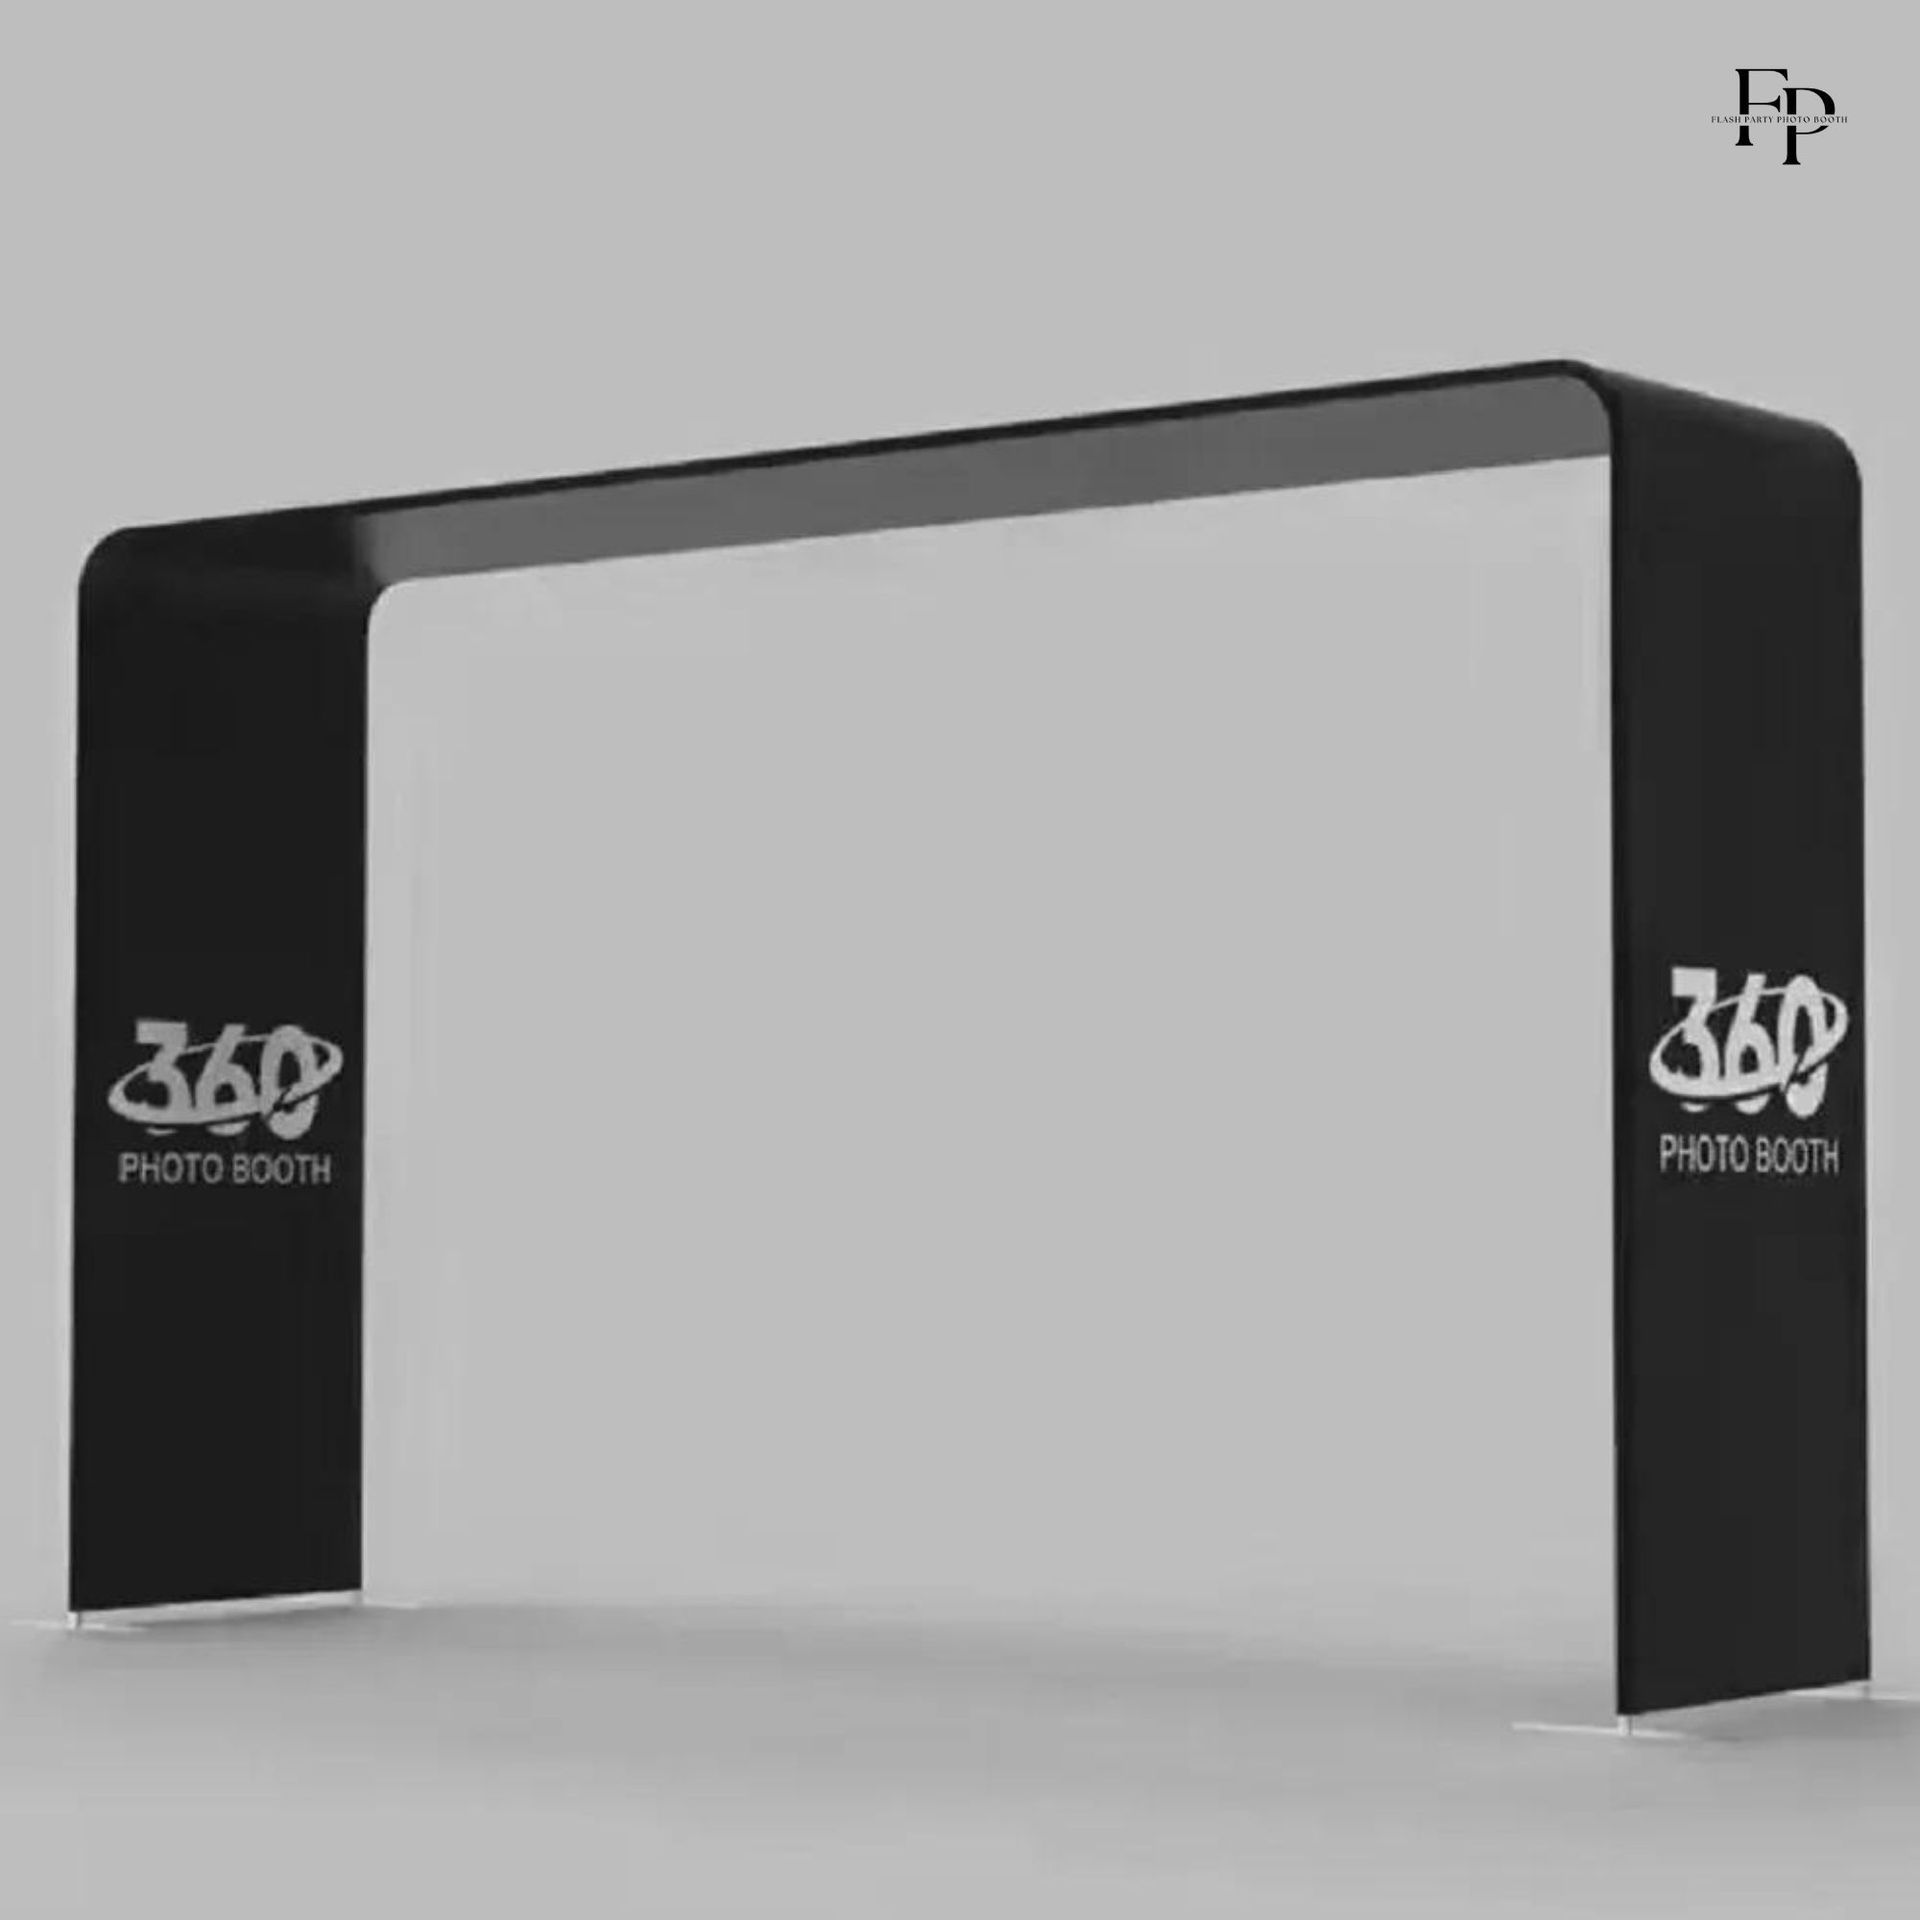 A picture of an Overhead 360 Photo Booth.